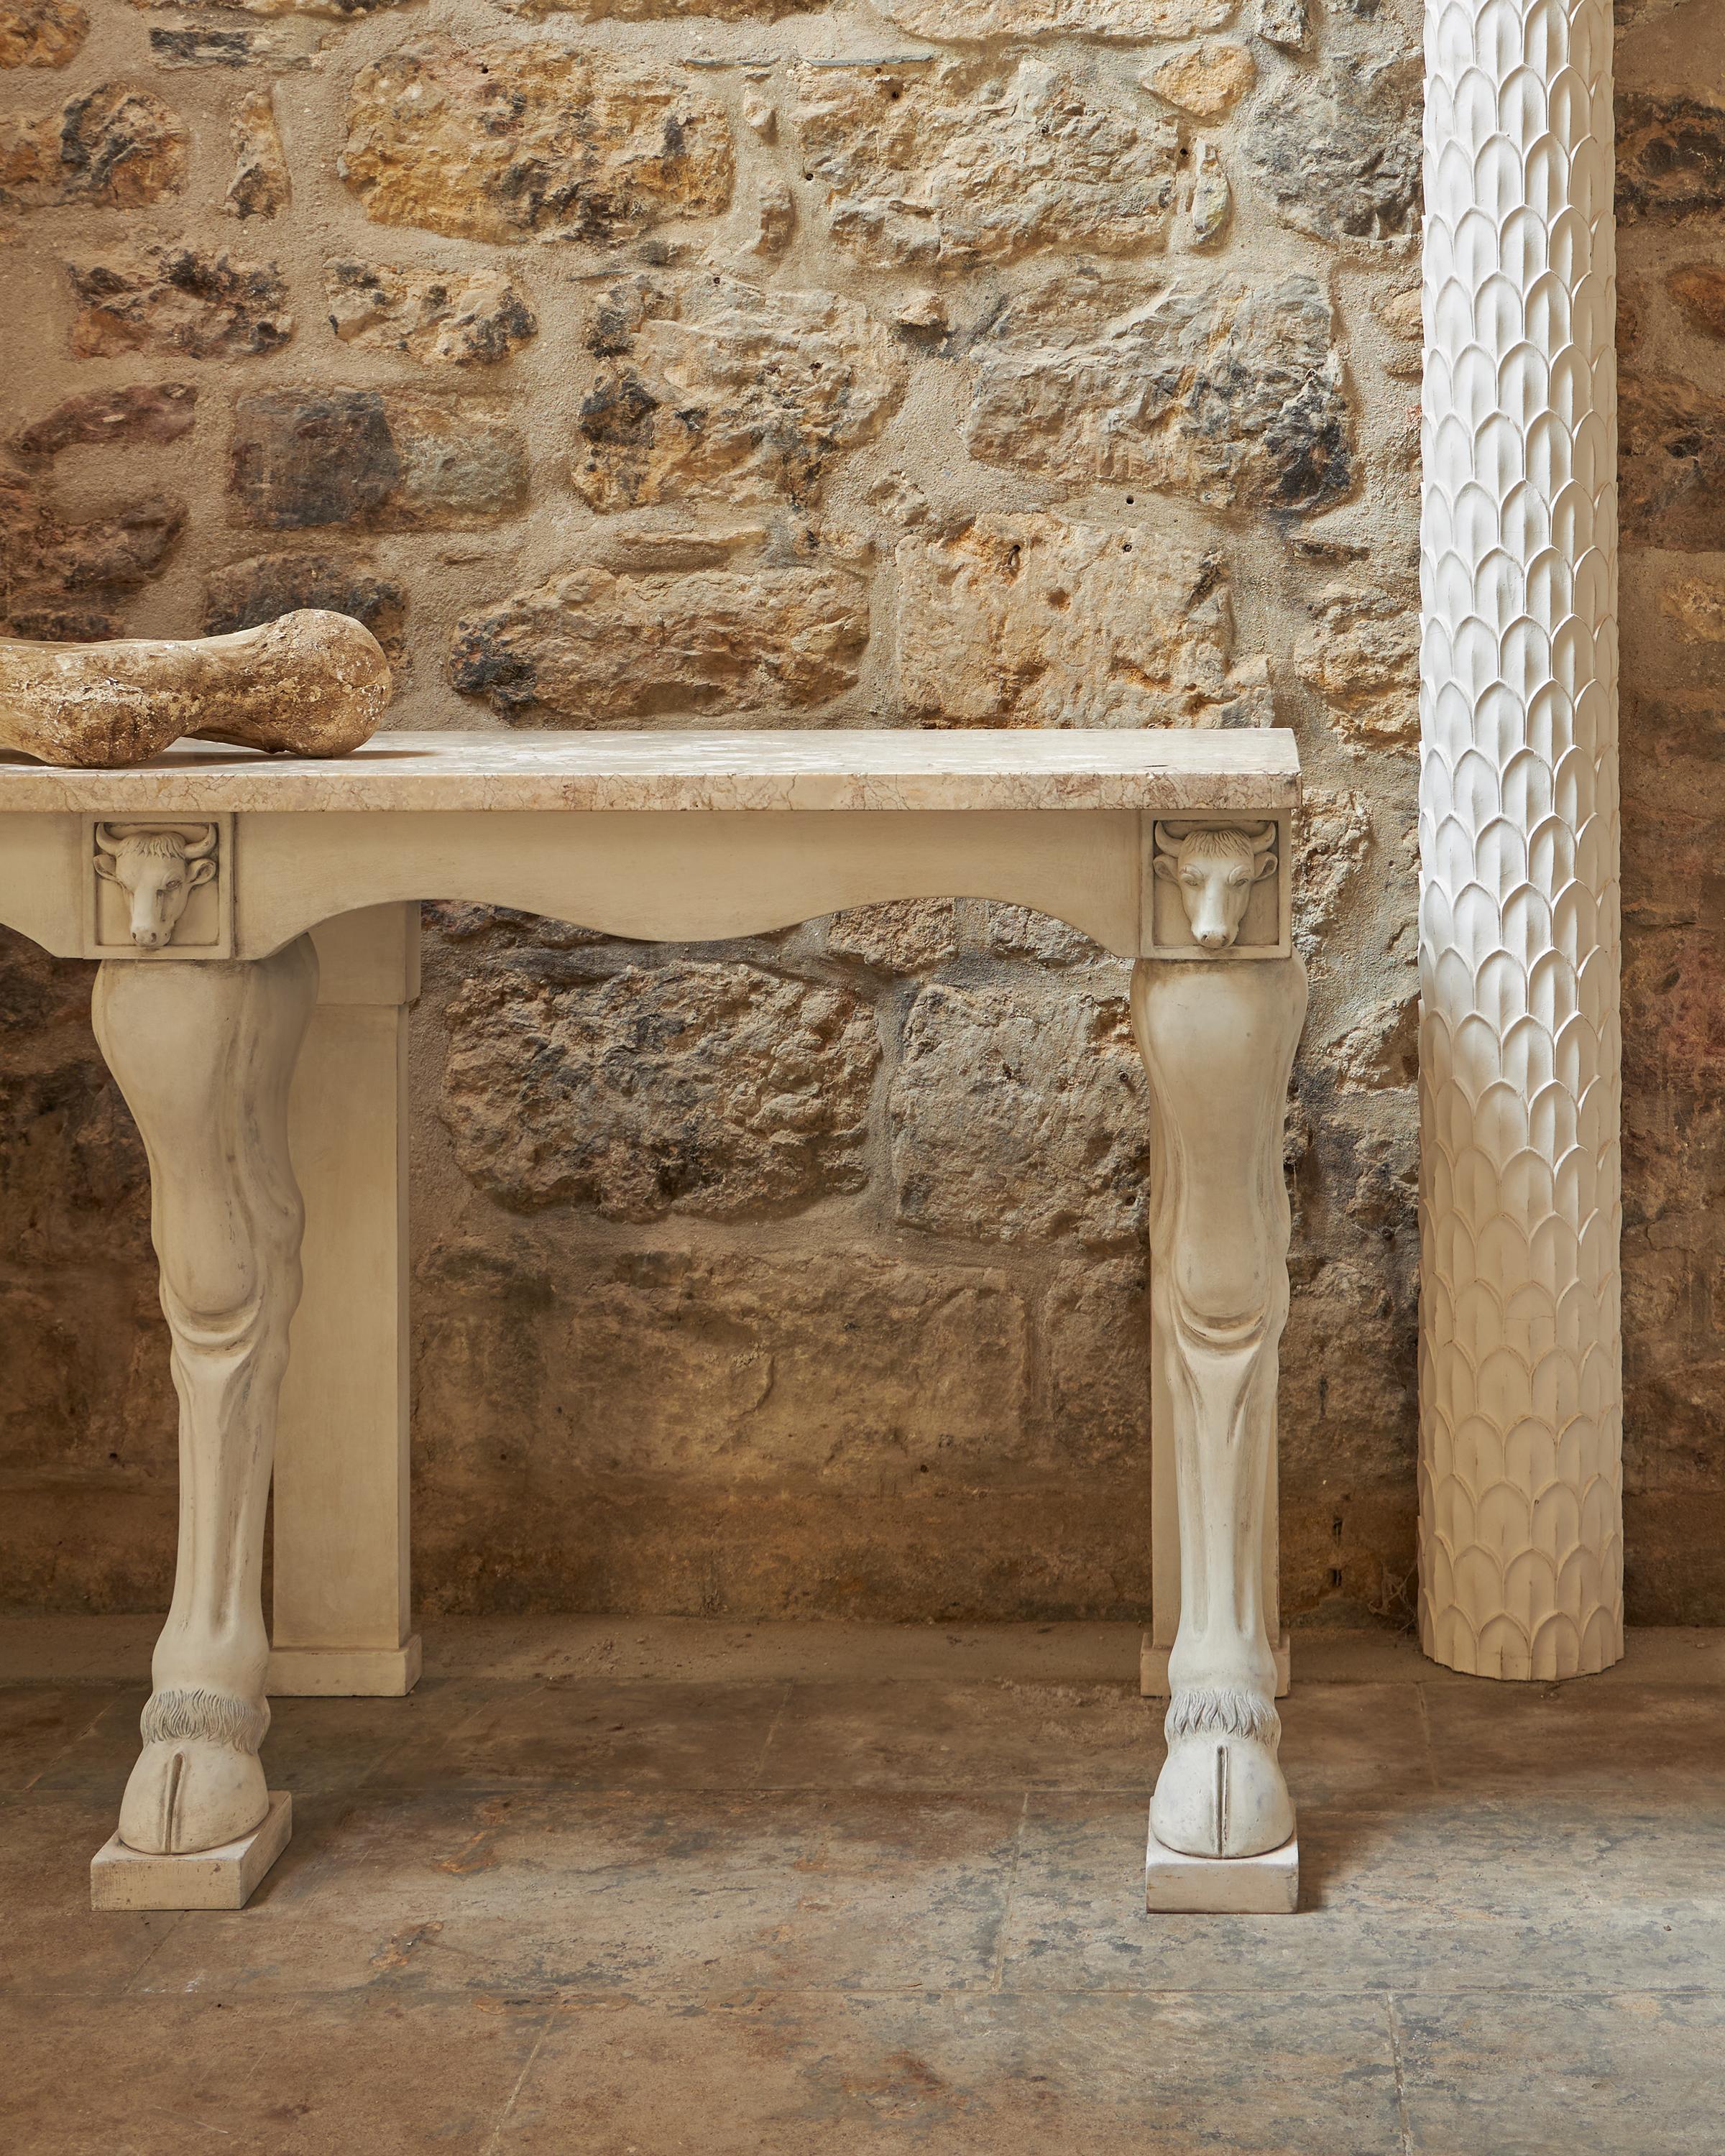 A fine carved wood console, the design taken from the 18th century dairy room at Ham House, Richmond, Surrey. The console with a generous 30mm marble top supported by three cows legs with hooves. The three carved legs are topped with square blocked